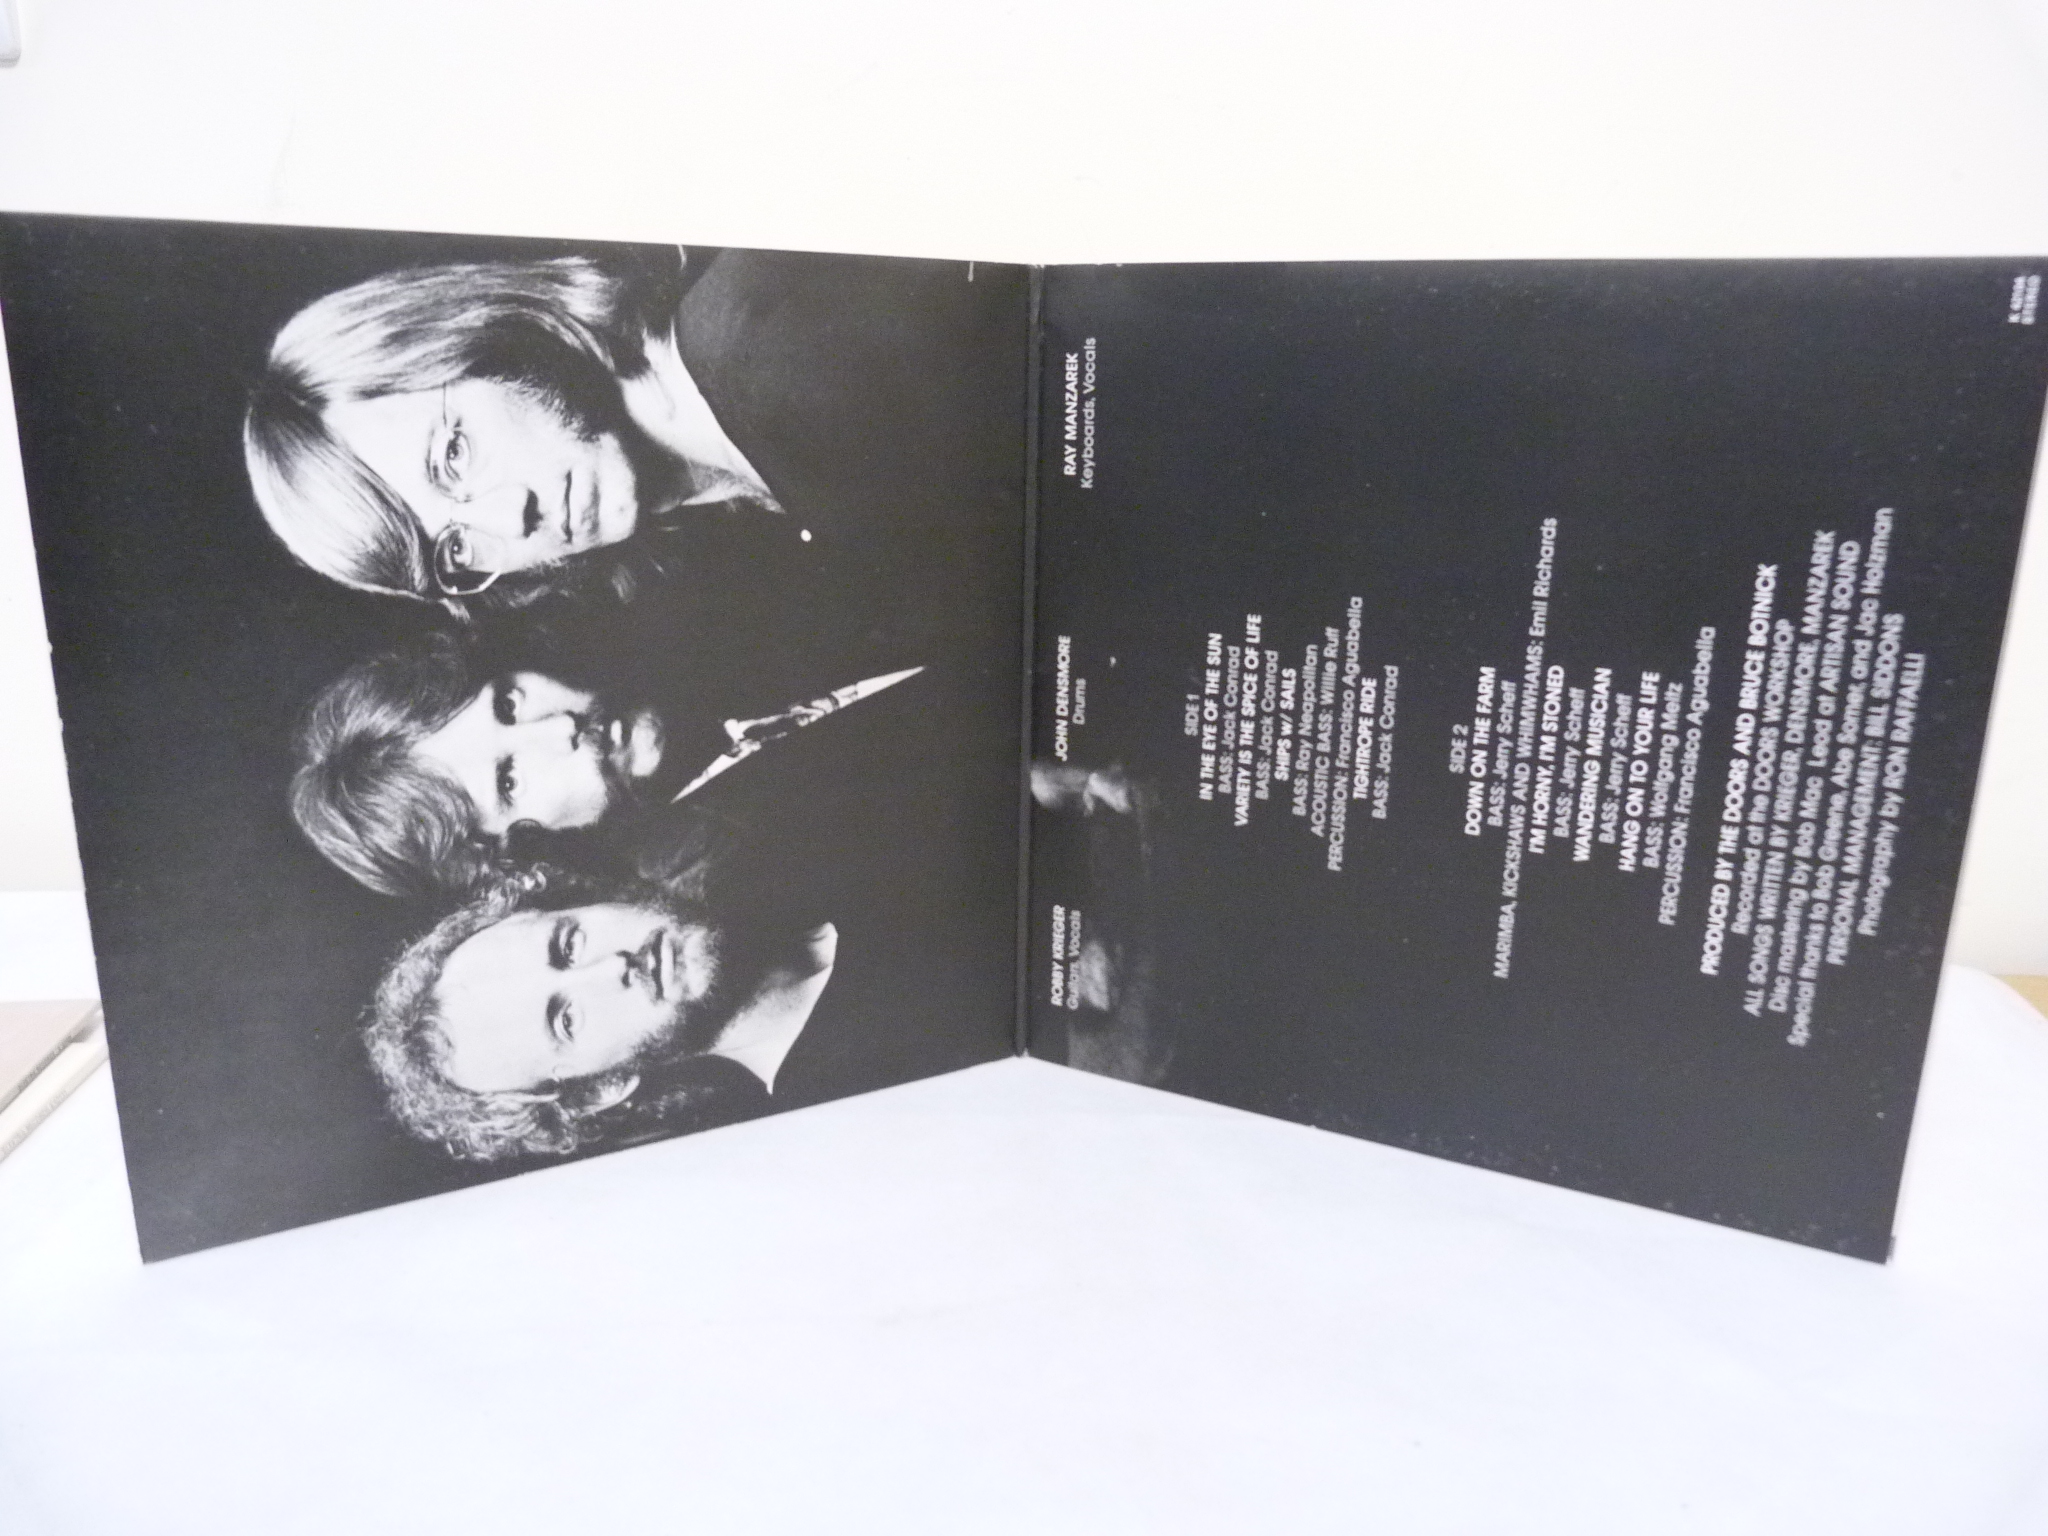 Three Doors LP's to include Other Voices, Weird Scenes and An American Prayer (with booklet). - Image 7 of 9